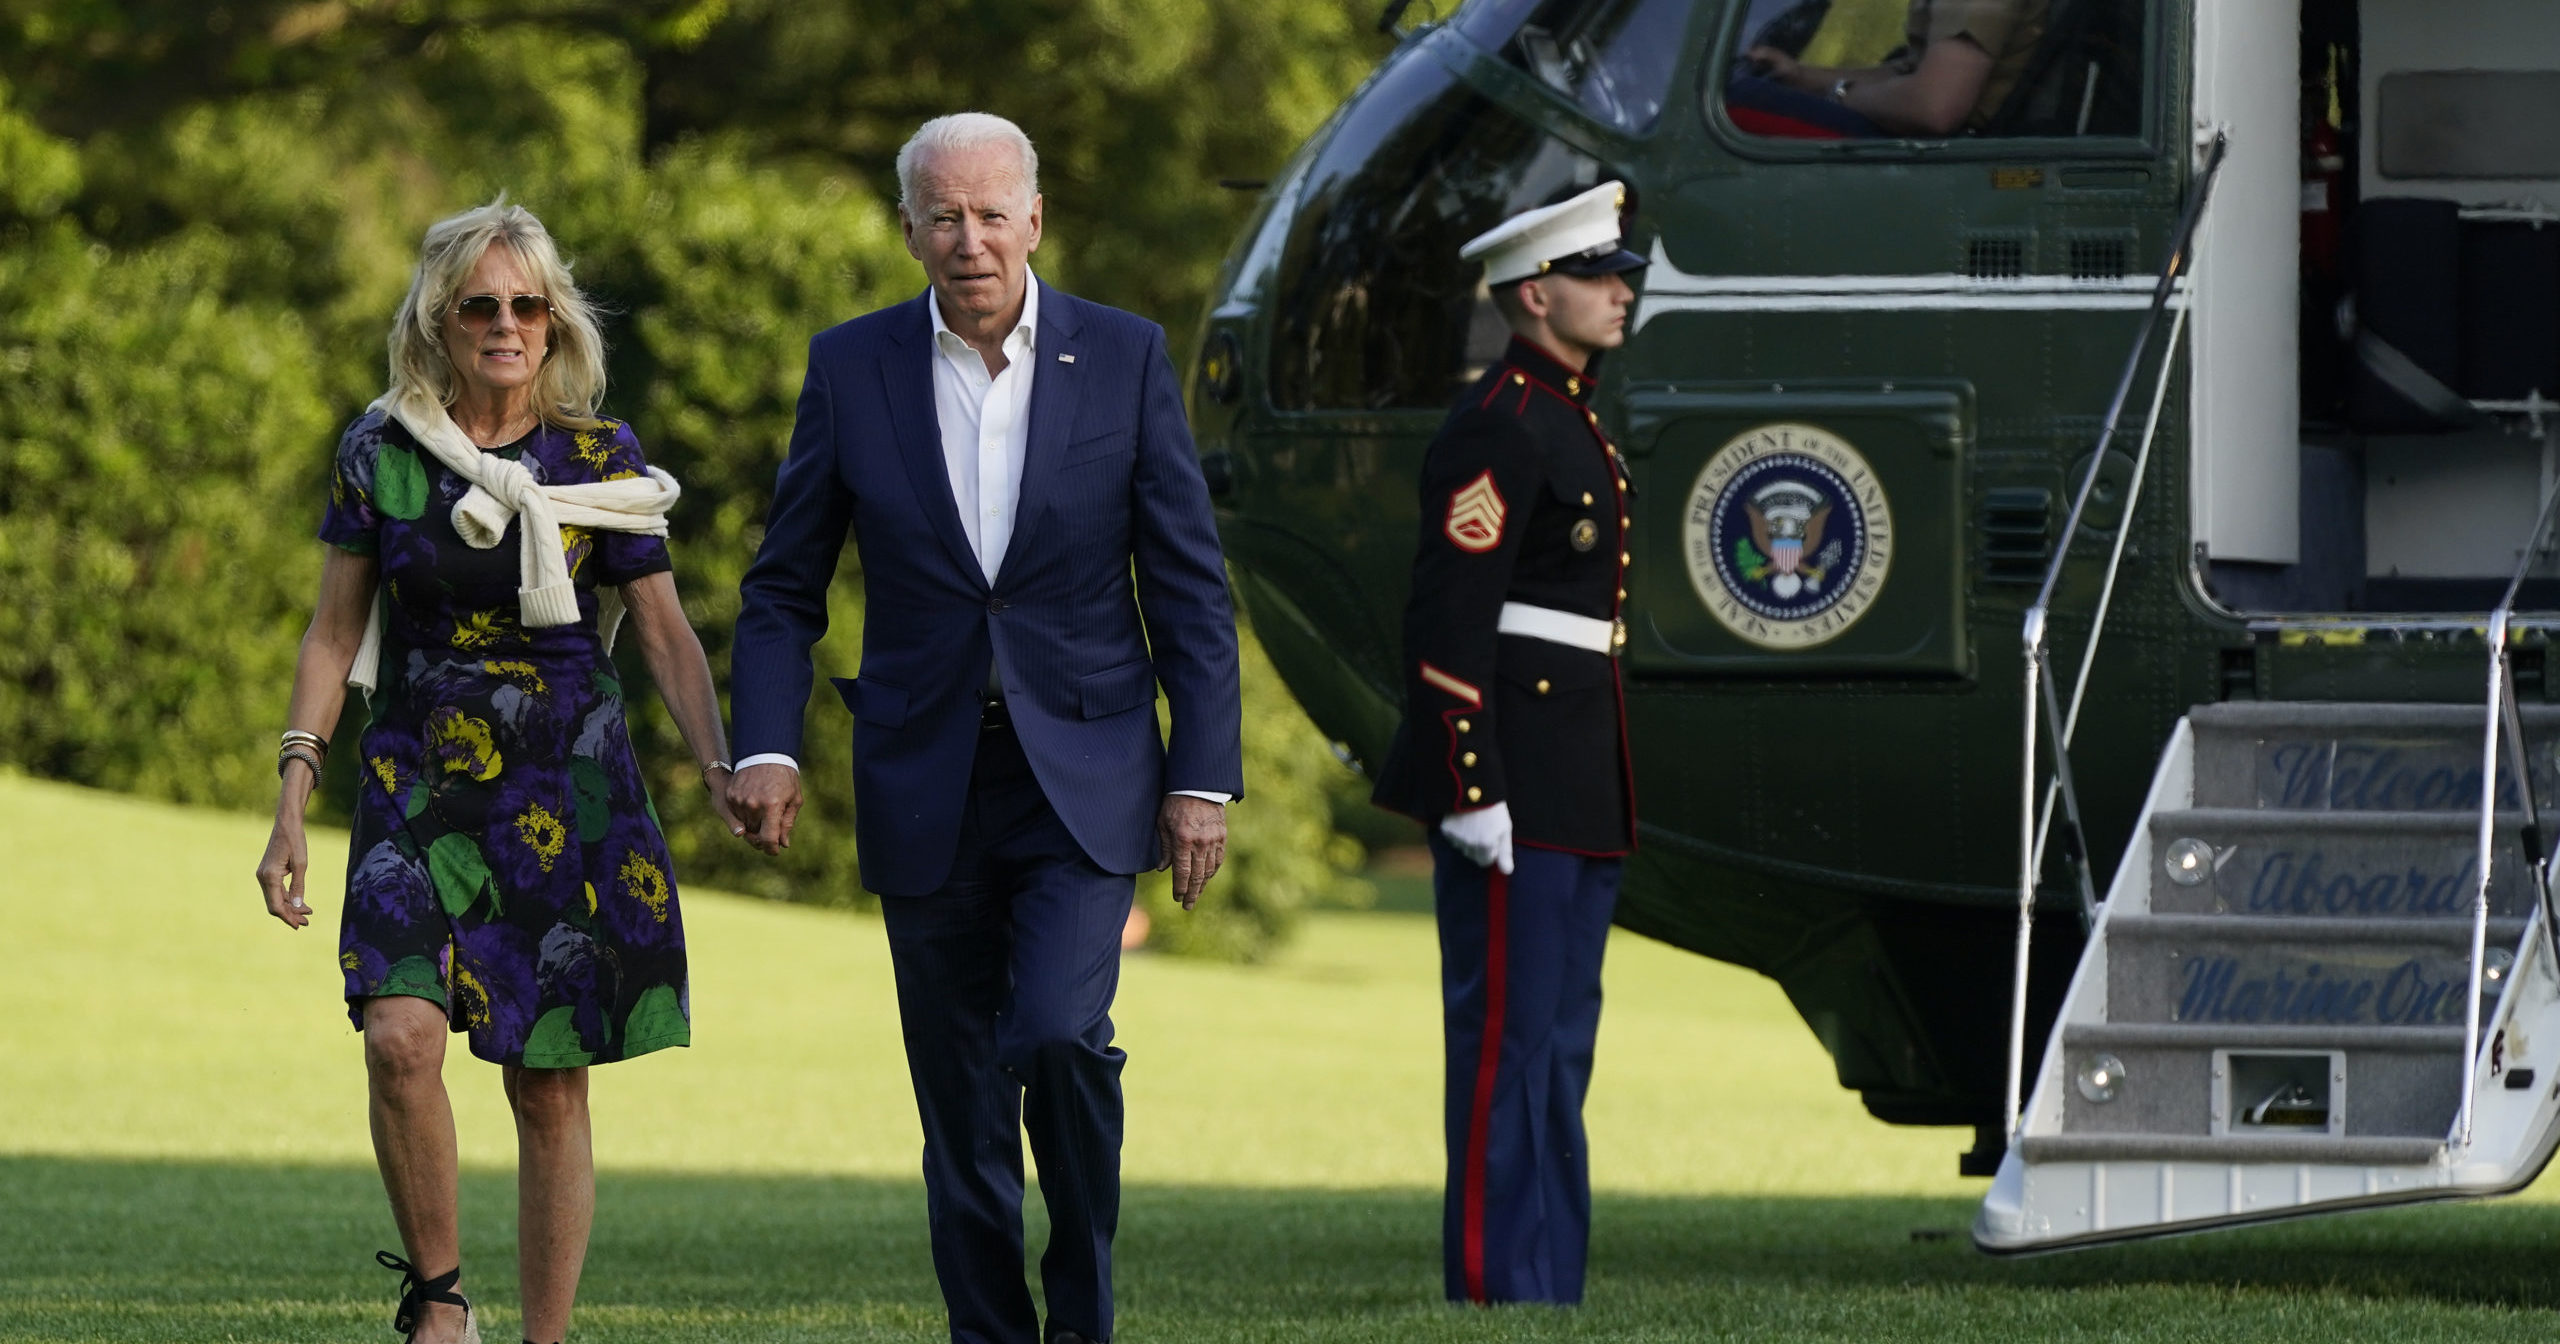 President Joe Biden and first lady Jill Biden walk on the South Lawn of the White House after stepping off Marine One on Sunday in Washington.